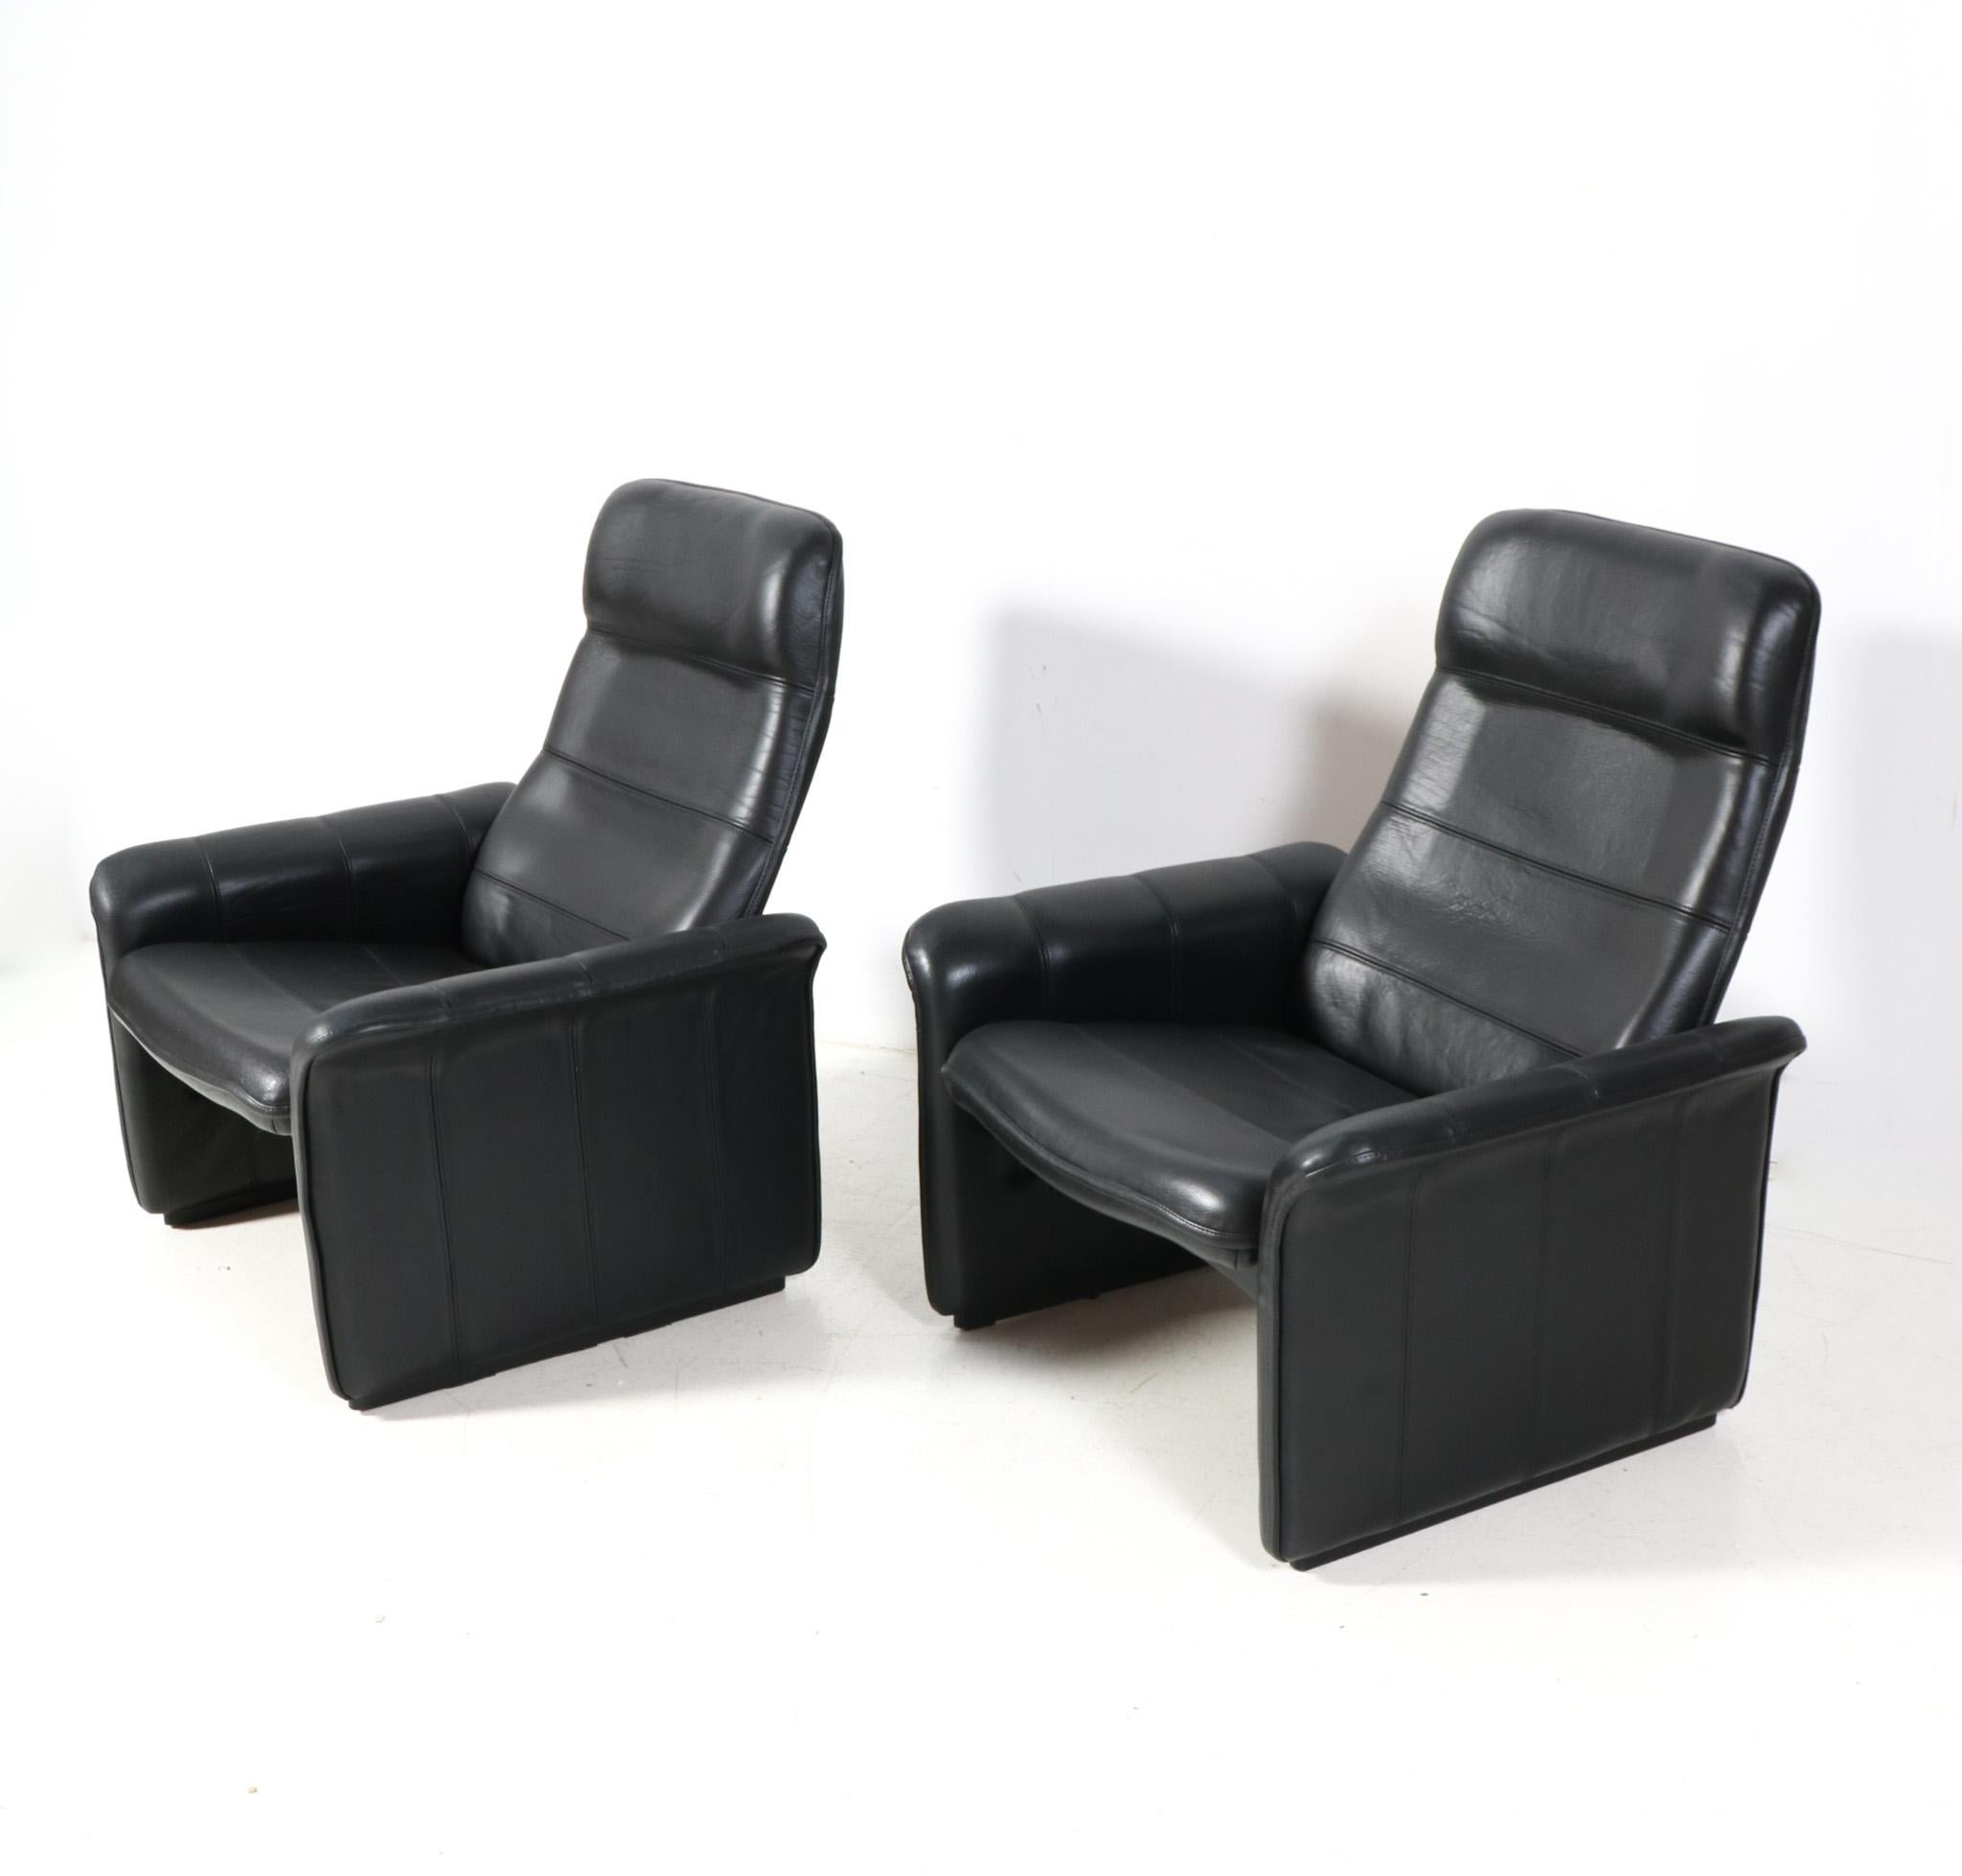 Swiss Pair of Buffalo Neck Leather DS-50 Lounge Chairs and Ottoman by De Sede, 1970s For Sale